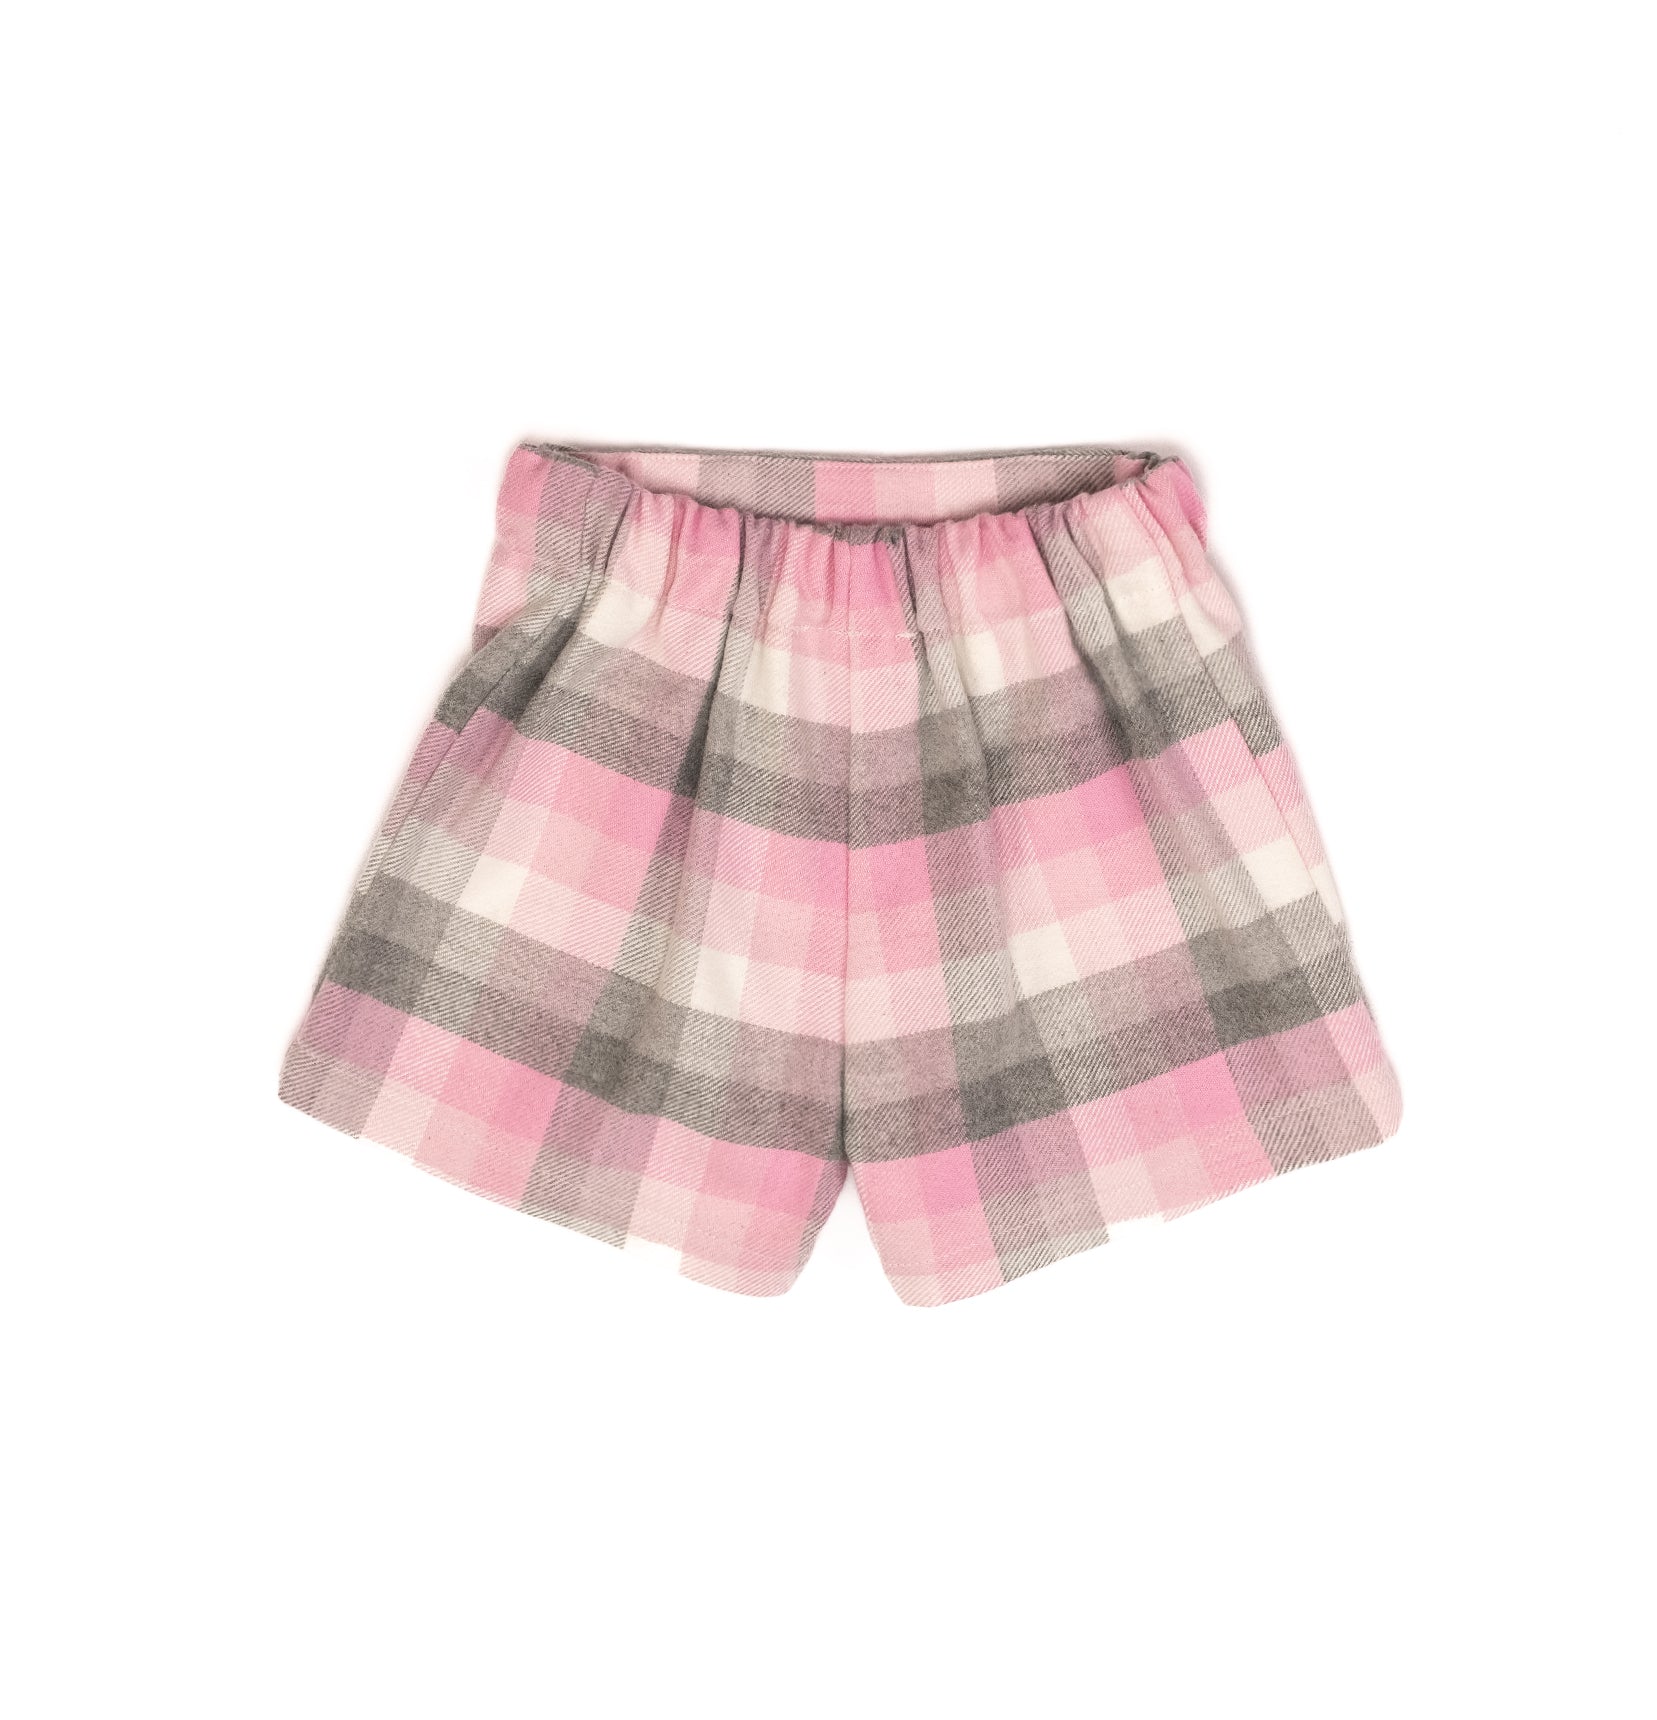 Trendy colorful baby girl skirt by Pompelo